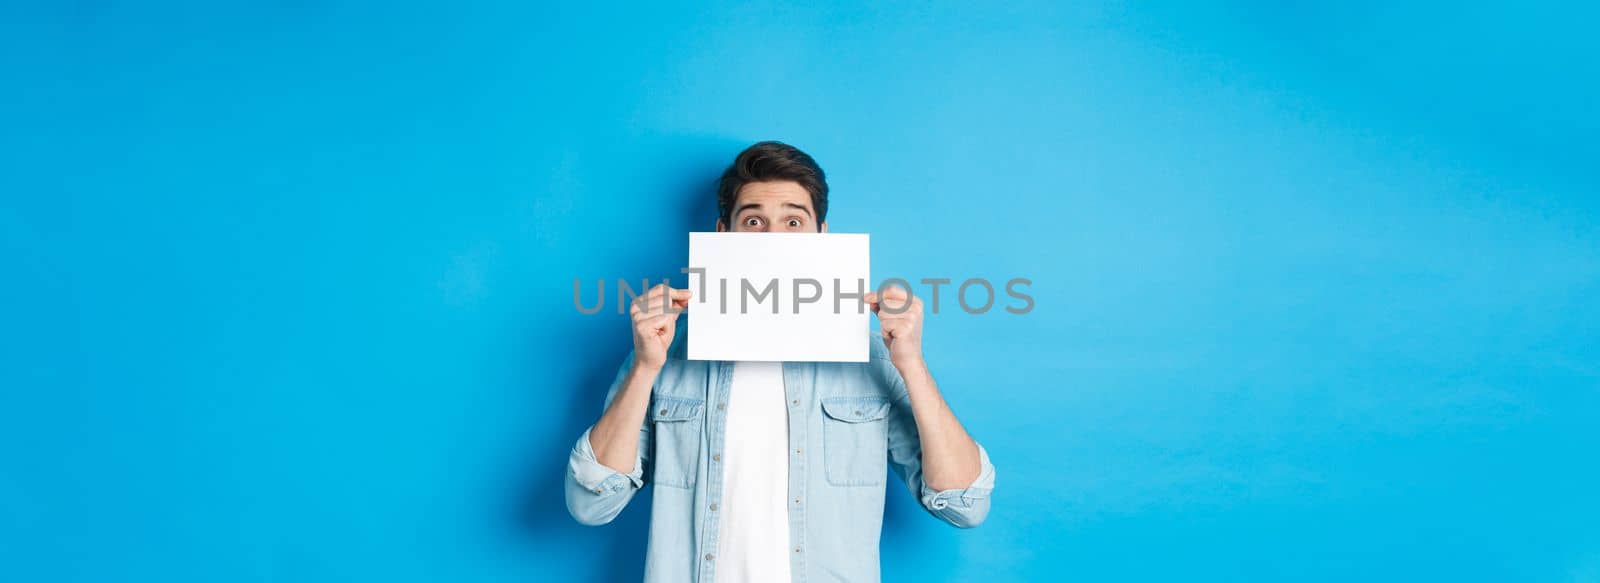 Excited man hiding face behind blank paper, place for your logo, standing over blue background.